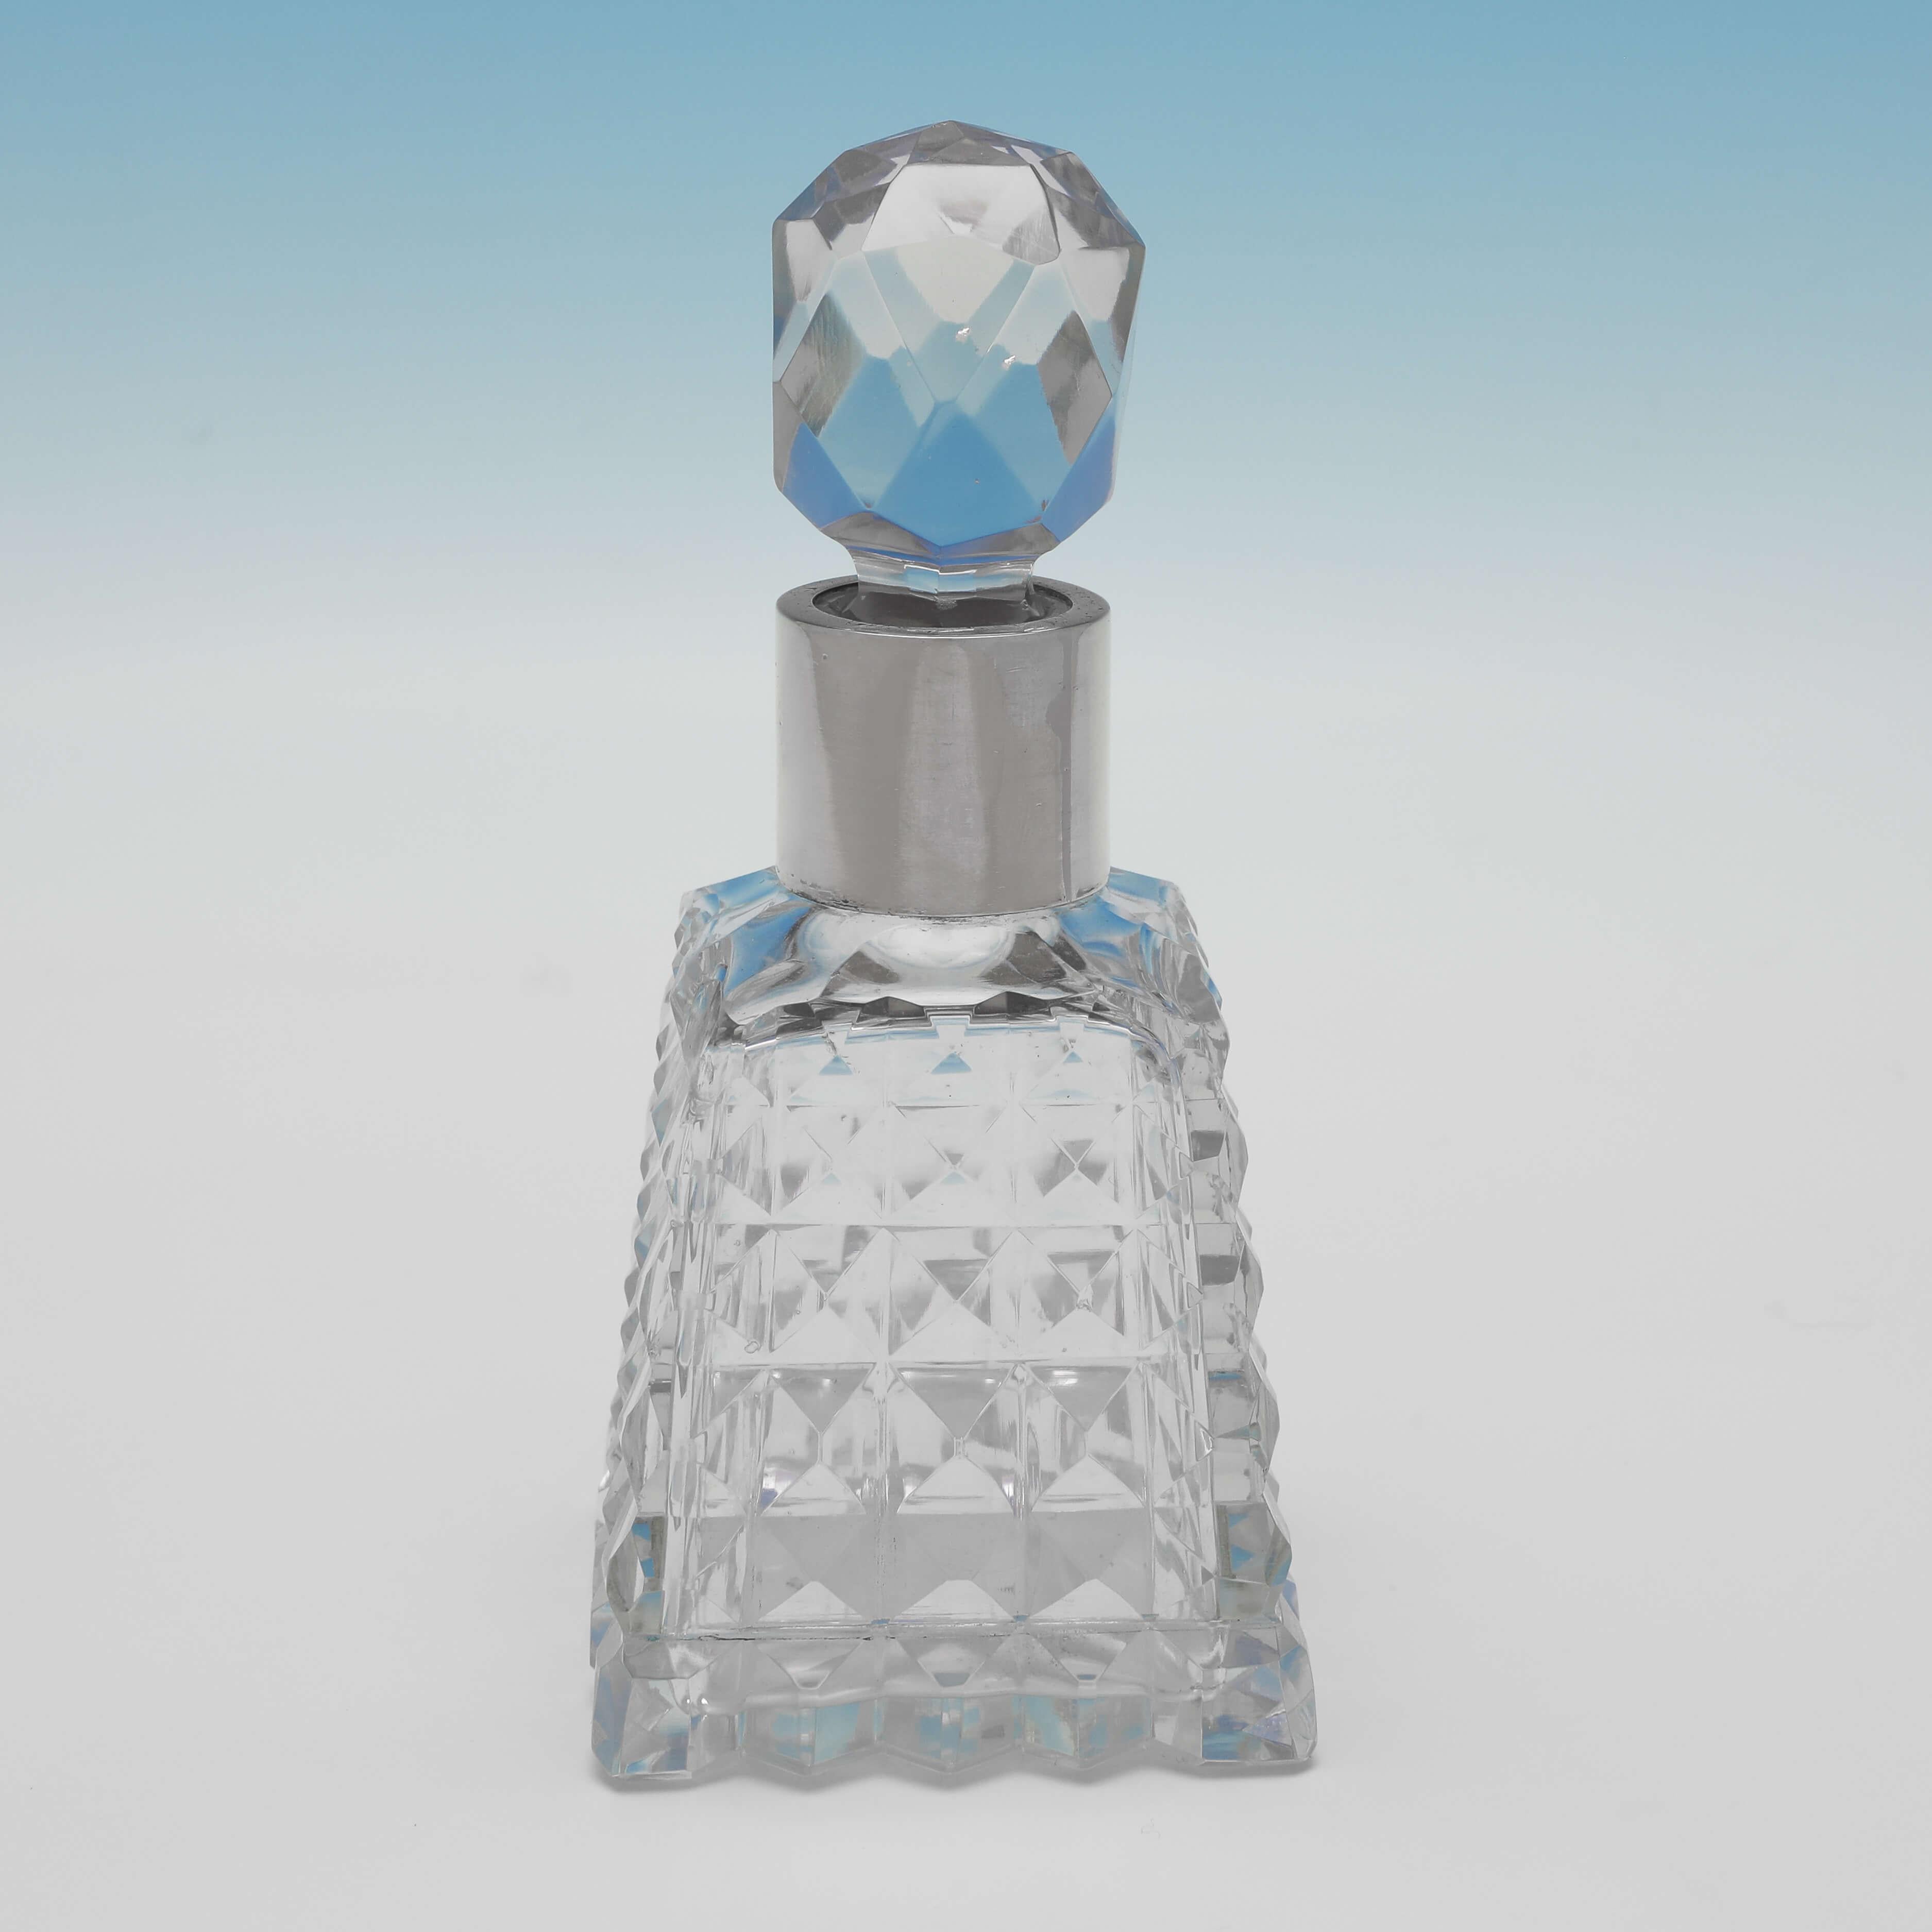 Hallmarked in London in 1893, this stylish, antique sterling silver scent bottle, features a hobnail cut glass body, a faceted stopper, and a plain silver collar. The scent bottle measures 5.5